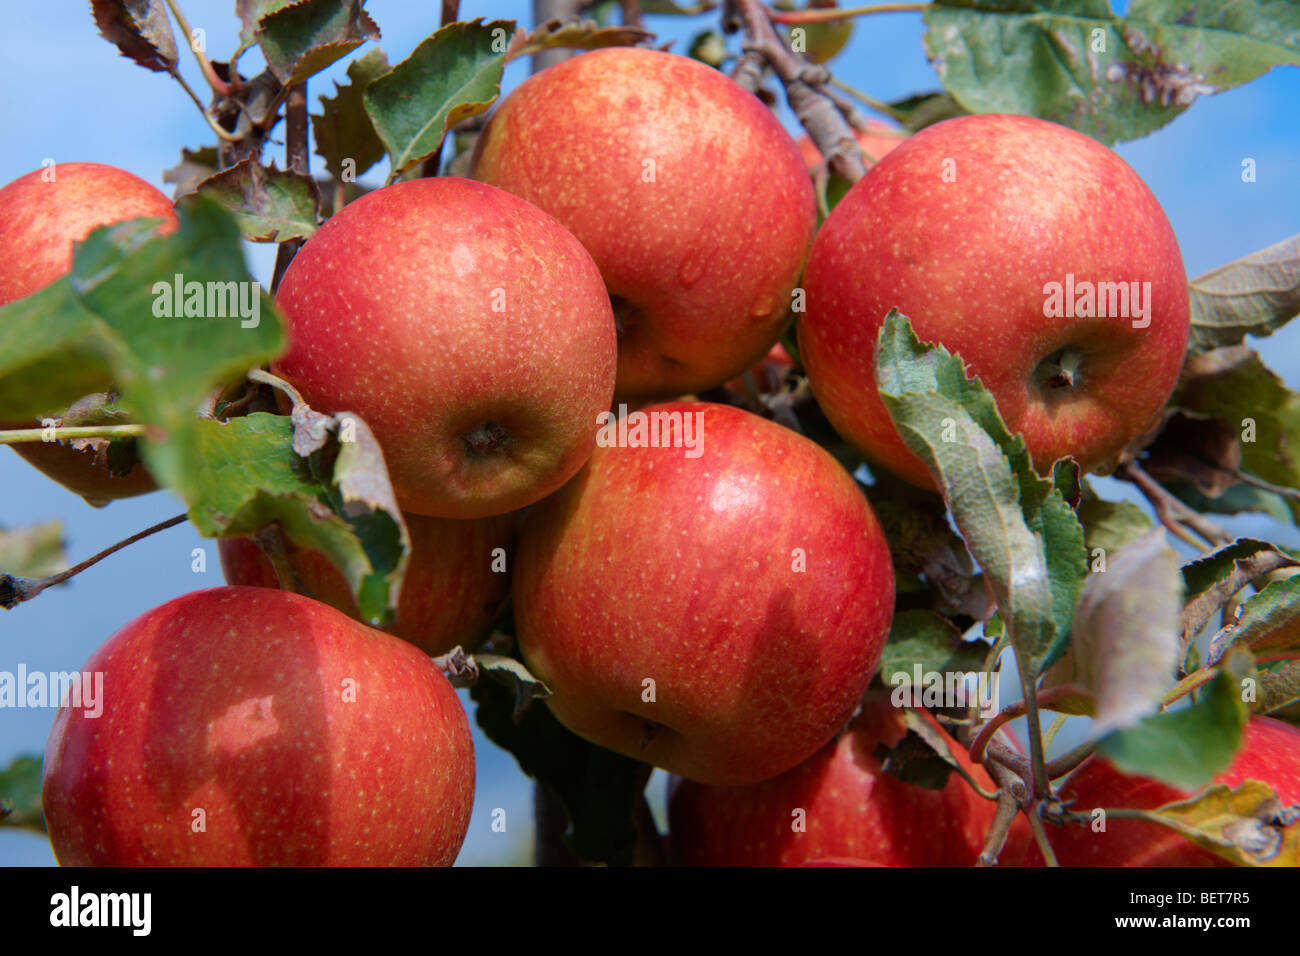 Fresh red apples on an apple tree in an orchard Stock Photo